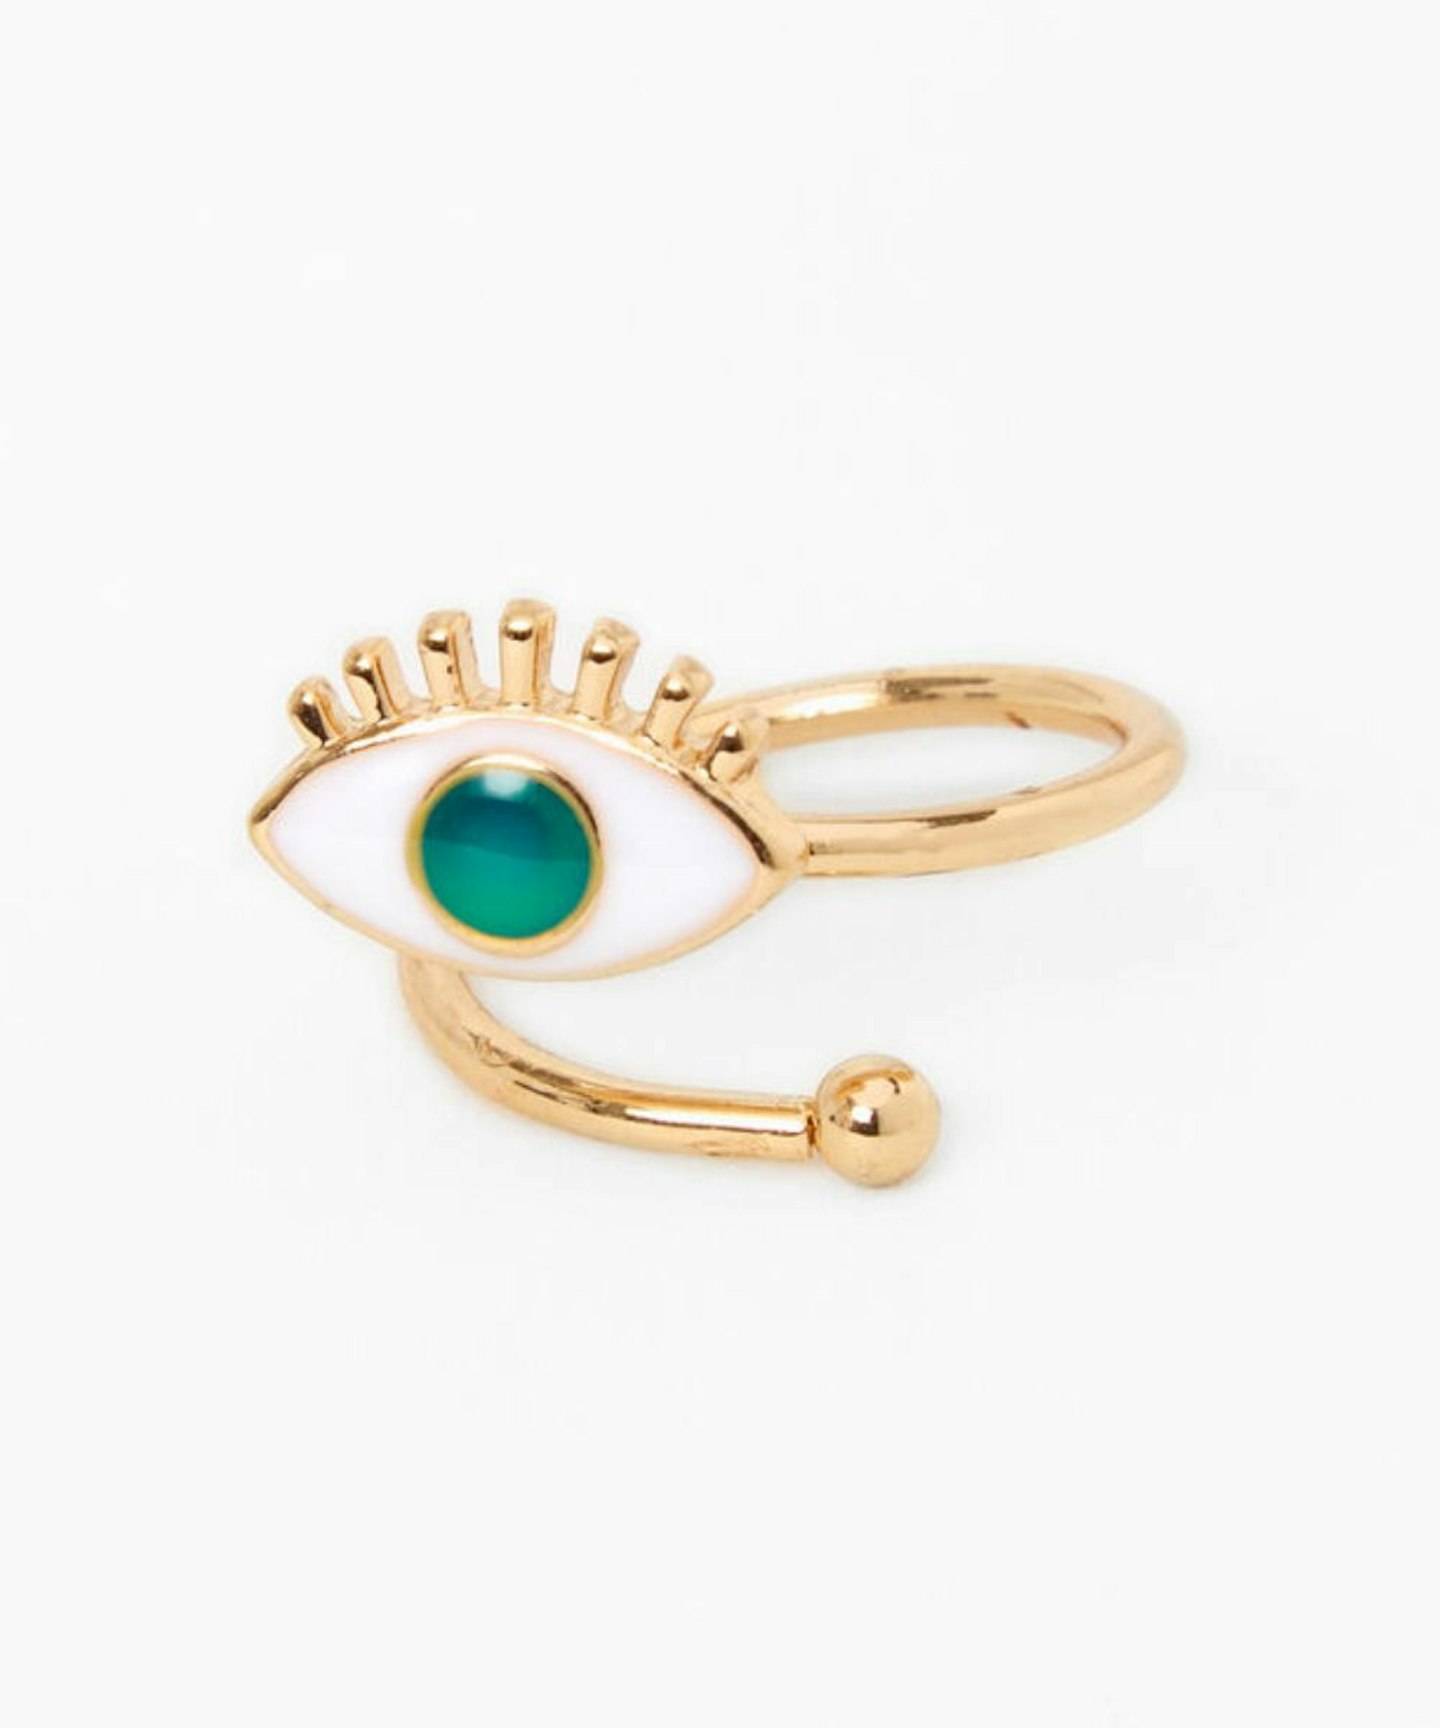 Mood Rings Are Back And Here's Where To Get Them For As Low As £3